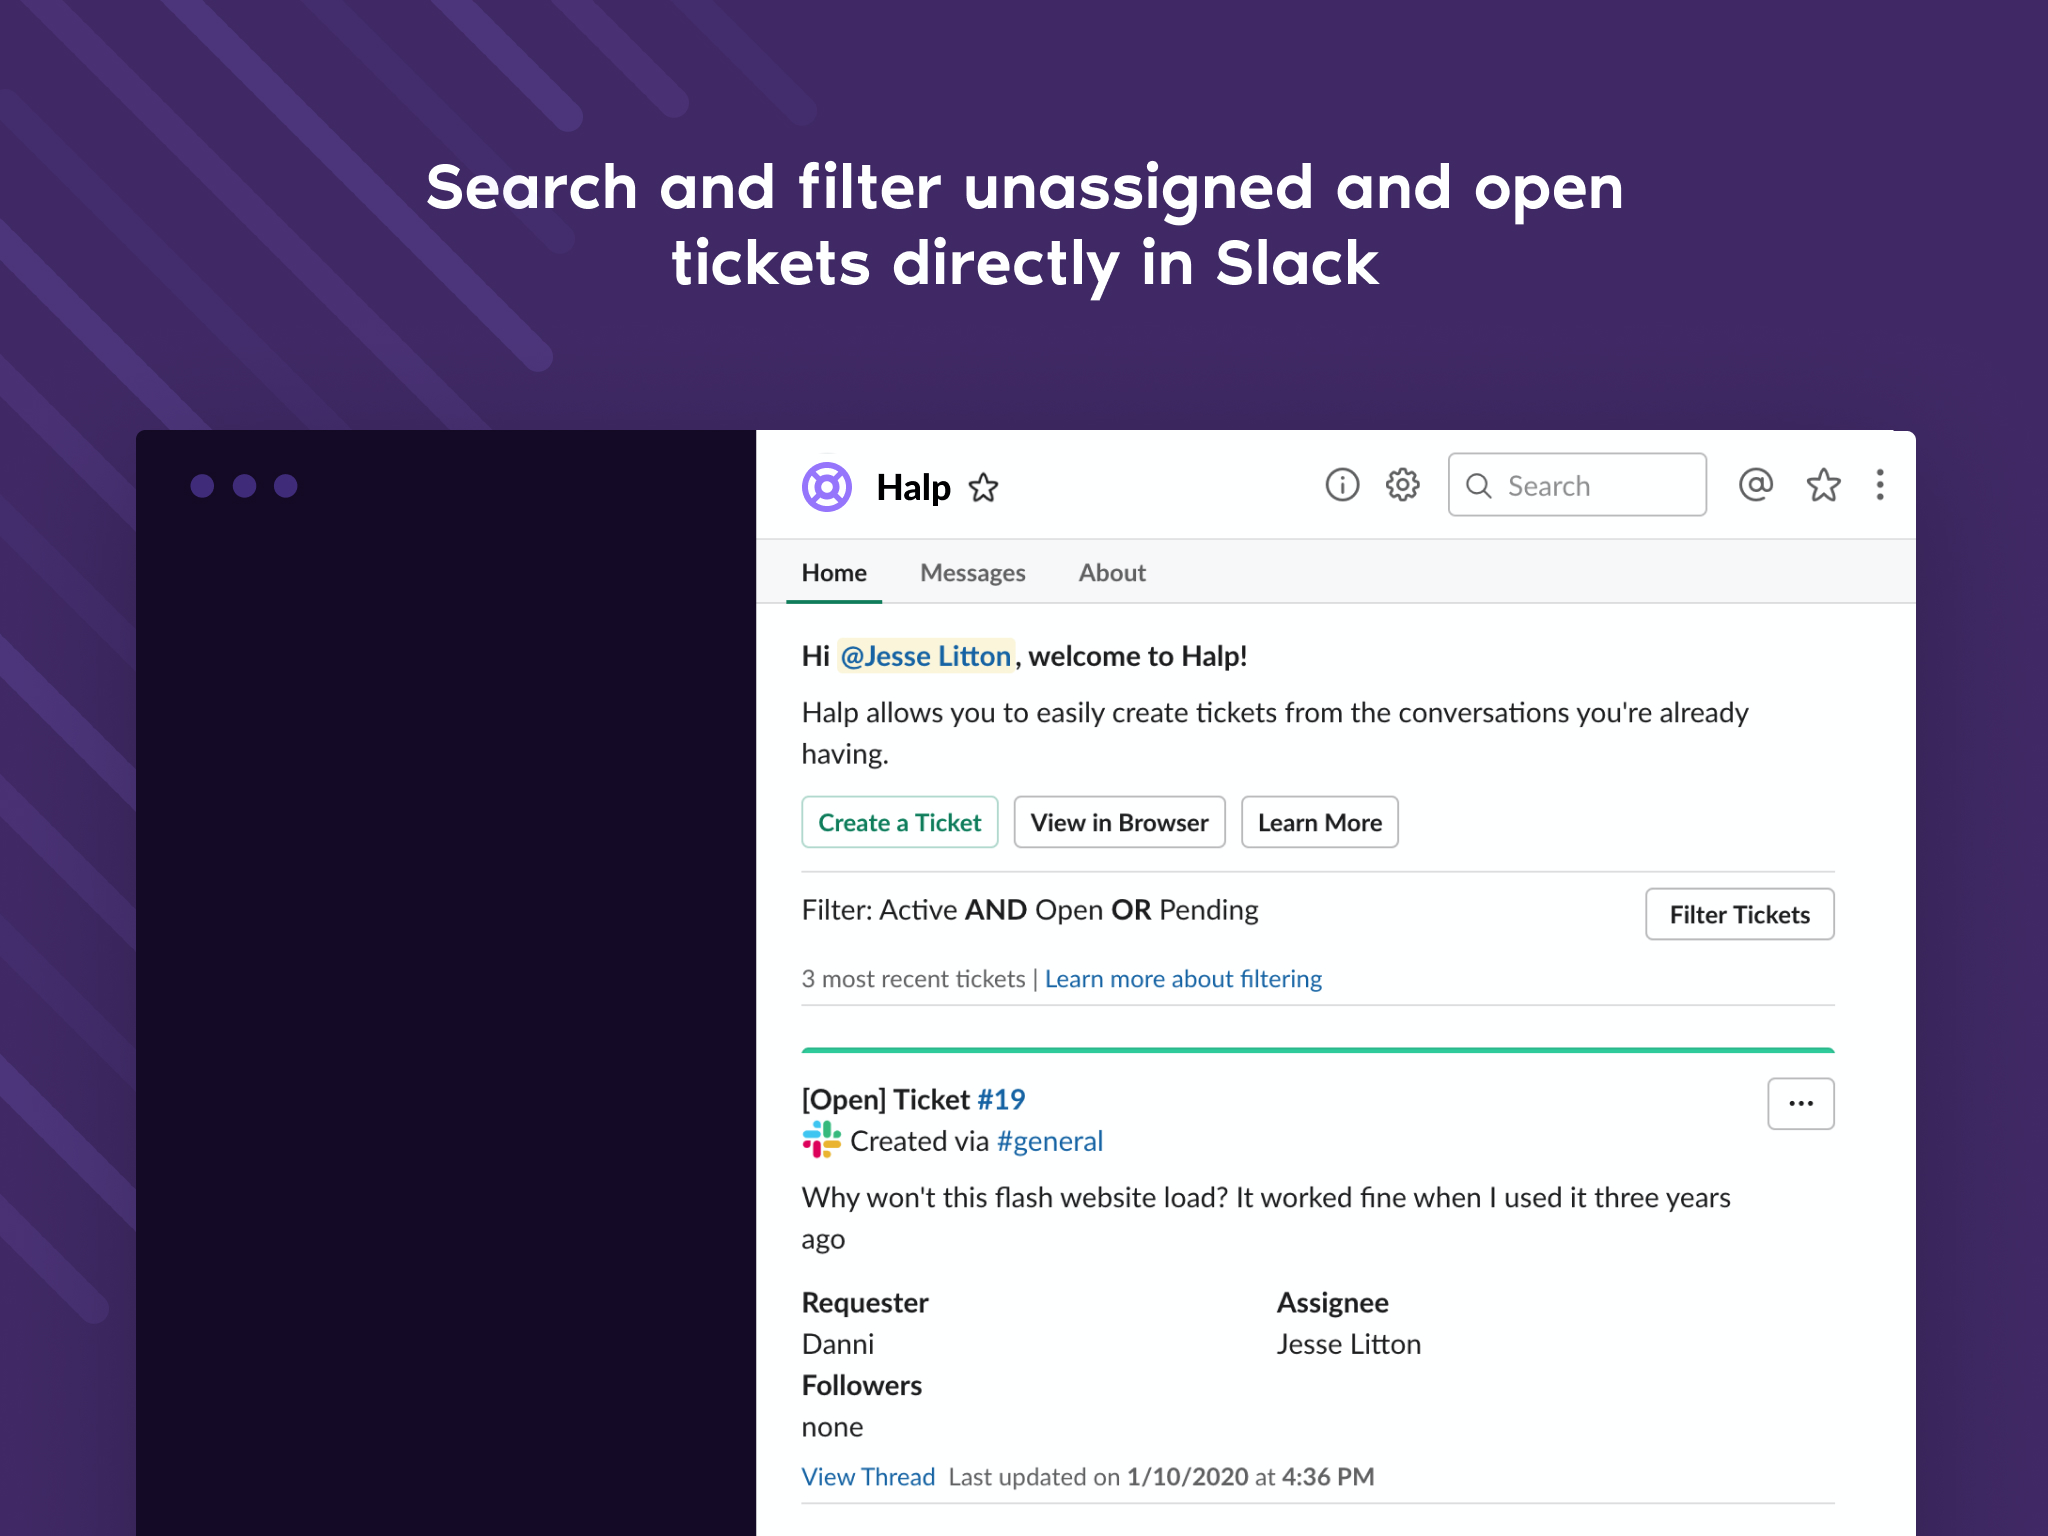 Halp Software - Halp has a new “App Home” experience in Slack!
App Home is a great way for anyone (Agents and End-users alike) to quickly find tickets that they may need to take action on or reference.